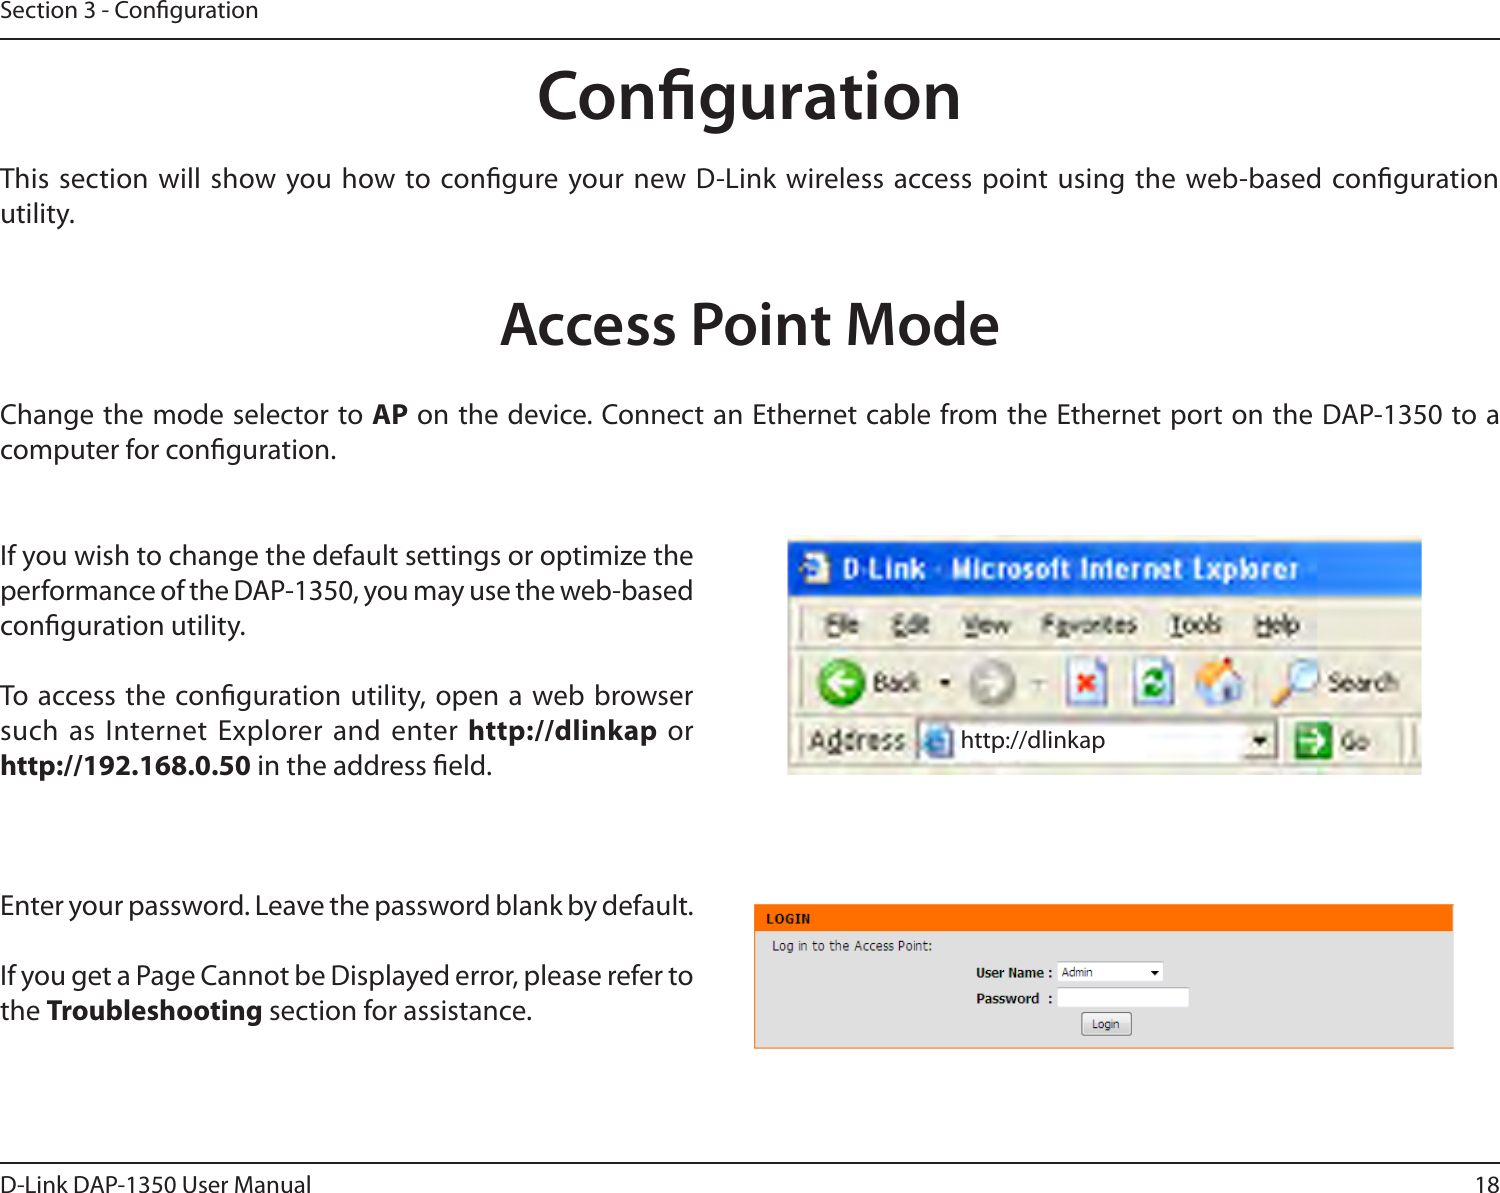 18D-Link DAP-1350 User ManualSection 3 - CongurationCongurationThis section  will show you how to congure your new D-Link wireless access point using the web-based conguration utility.Access Point ModeIf you wish to change the default settings or optimize the performance of the DAP-1350, you may use the web-based conguration utility.To access the conguration utility, open a web browser such as Internet Explorer and  enter http://dlinkap  or http://192.168.0.50 in the address eld.Enter your password. Leave the password blank by default.If you get a Page Cannot be Displayed error, please refer to the Troubleshooting section for assistance.Change the mode selector to AP on the device. Connect an Ethernet cable from the Ethernet port on the DAP-1350 to a computer for conguration.http://dlinkap